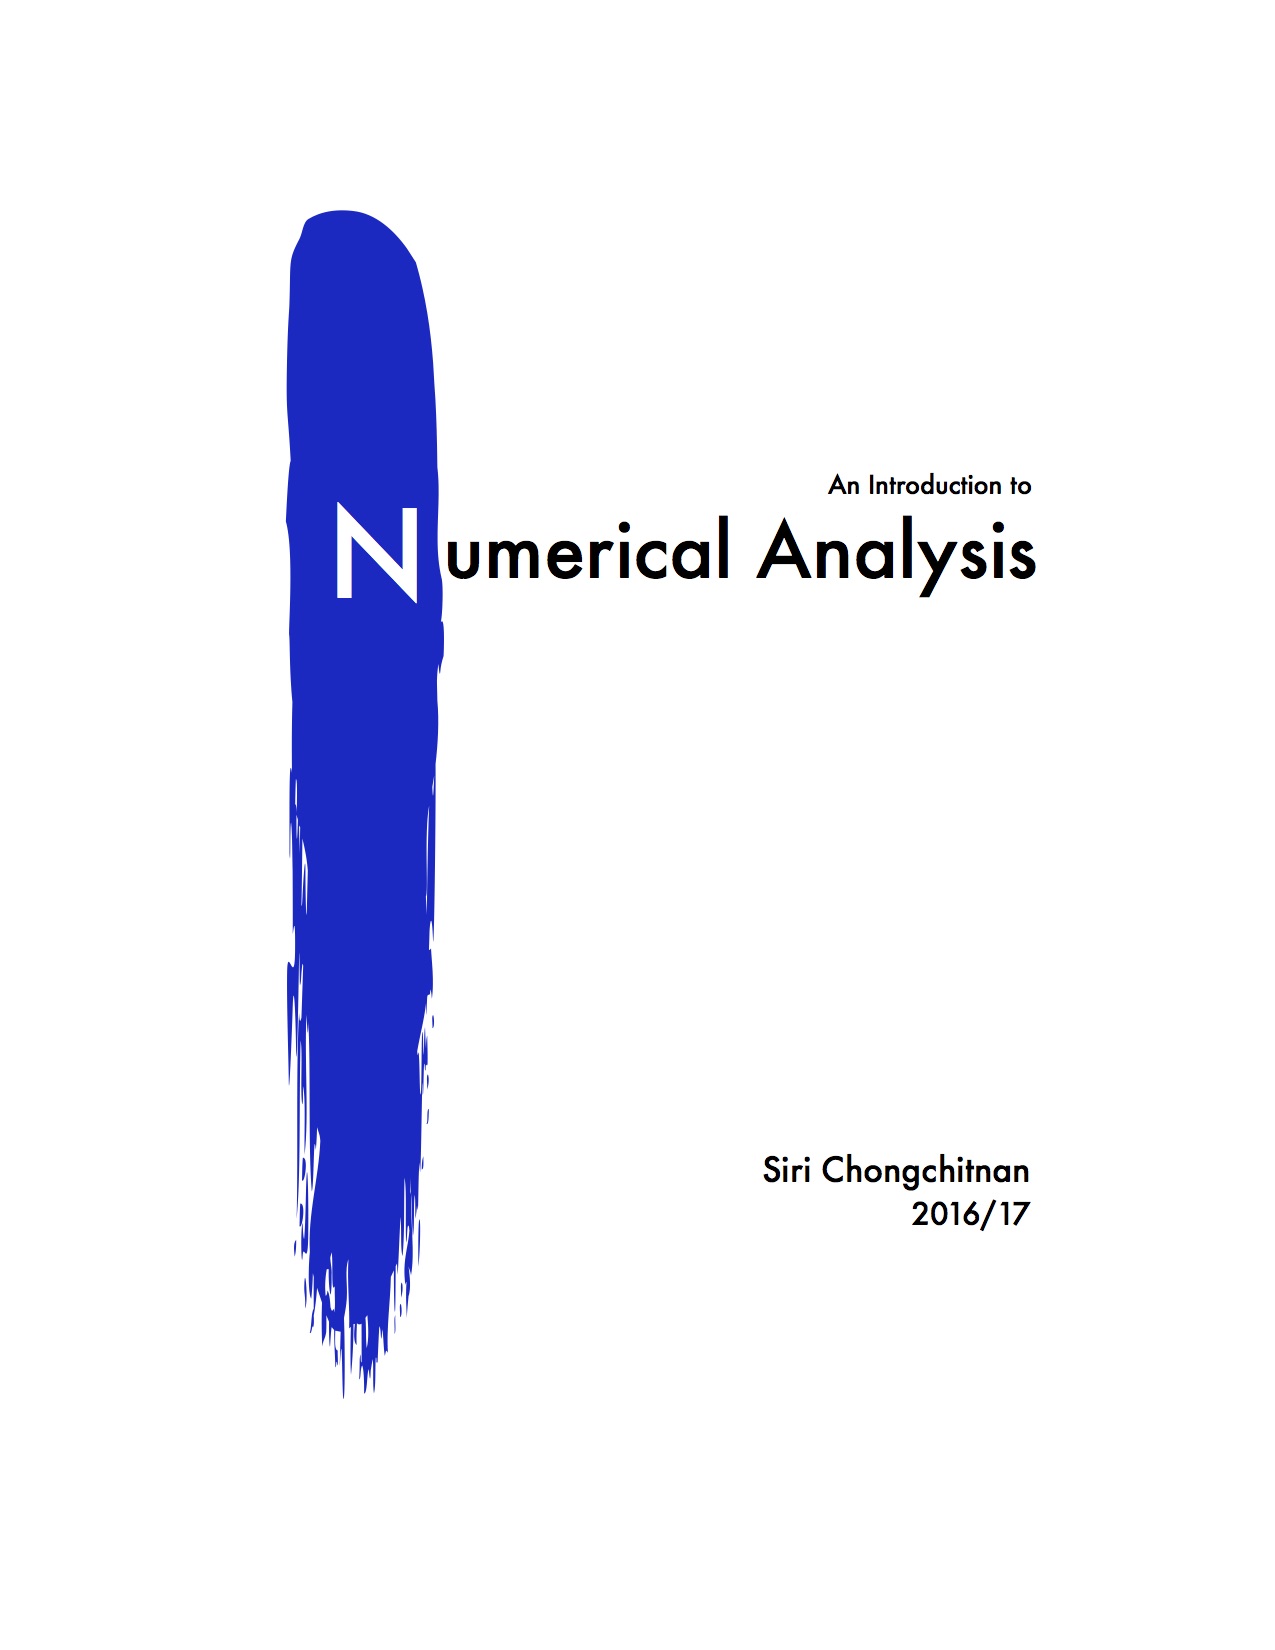 Introduction to Numerical Analysis (16/17)